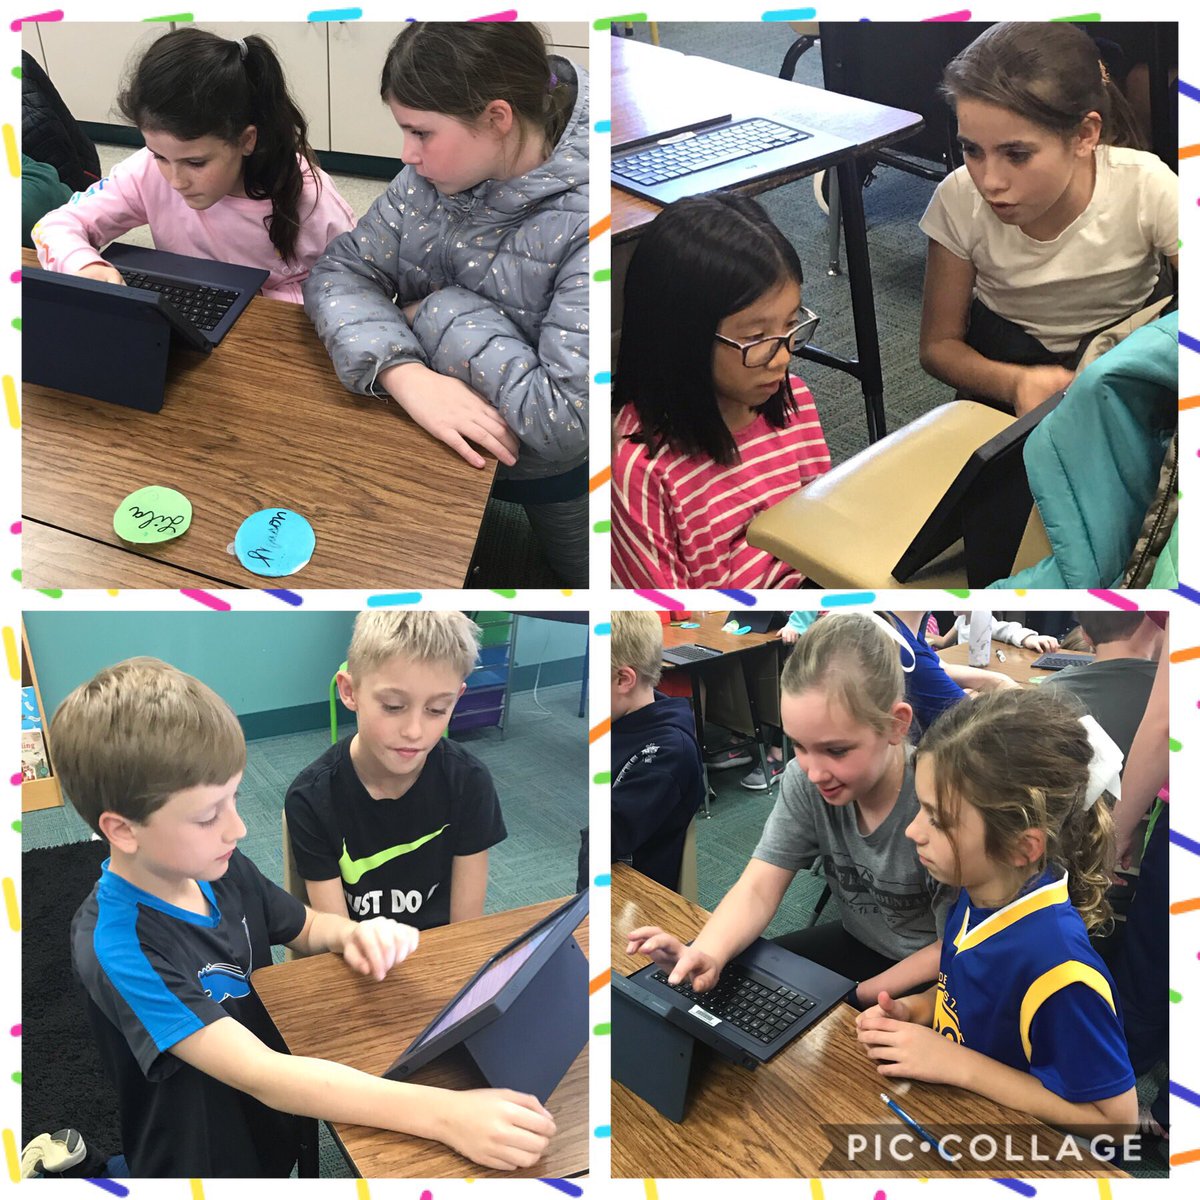 Ss collaborating with @MsSmithSBE class and teaching them all about using Line Draw in keynote! #ThisIsSBE #ThisisMidway #TechnologyMatters @kaci_powers